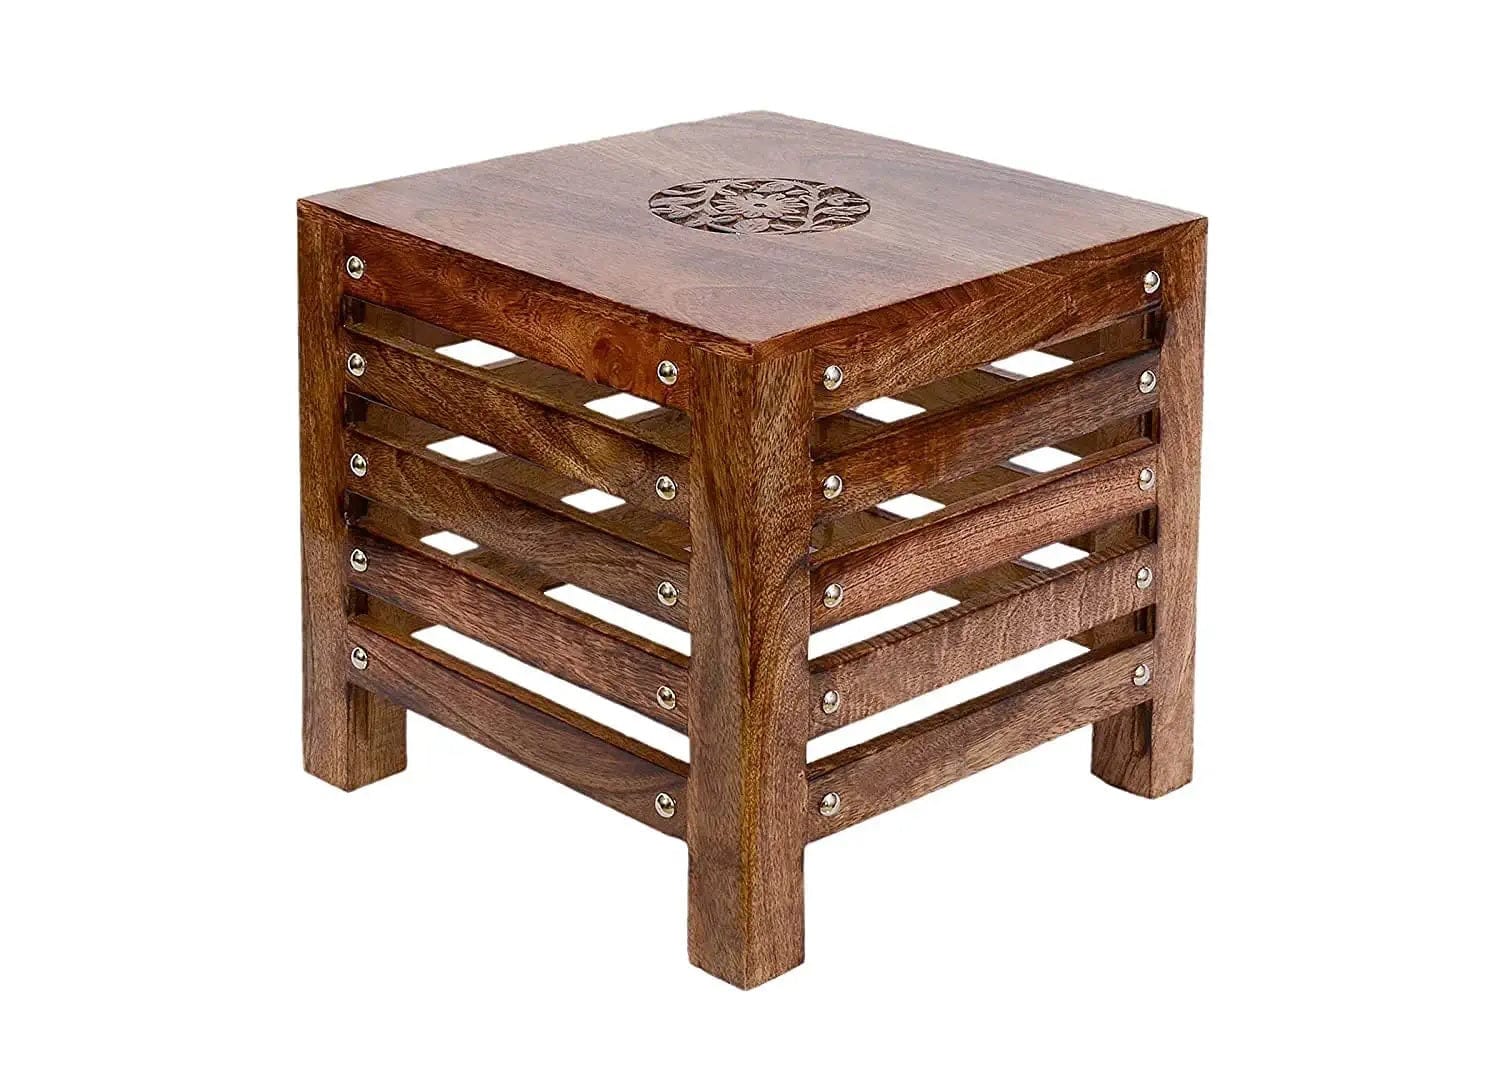 Wooden Beautiful Handmade Stool | Table | for Office | Home Furniture | Outdoor | Décor - Brown